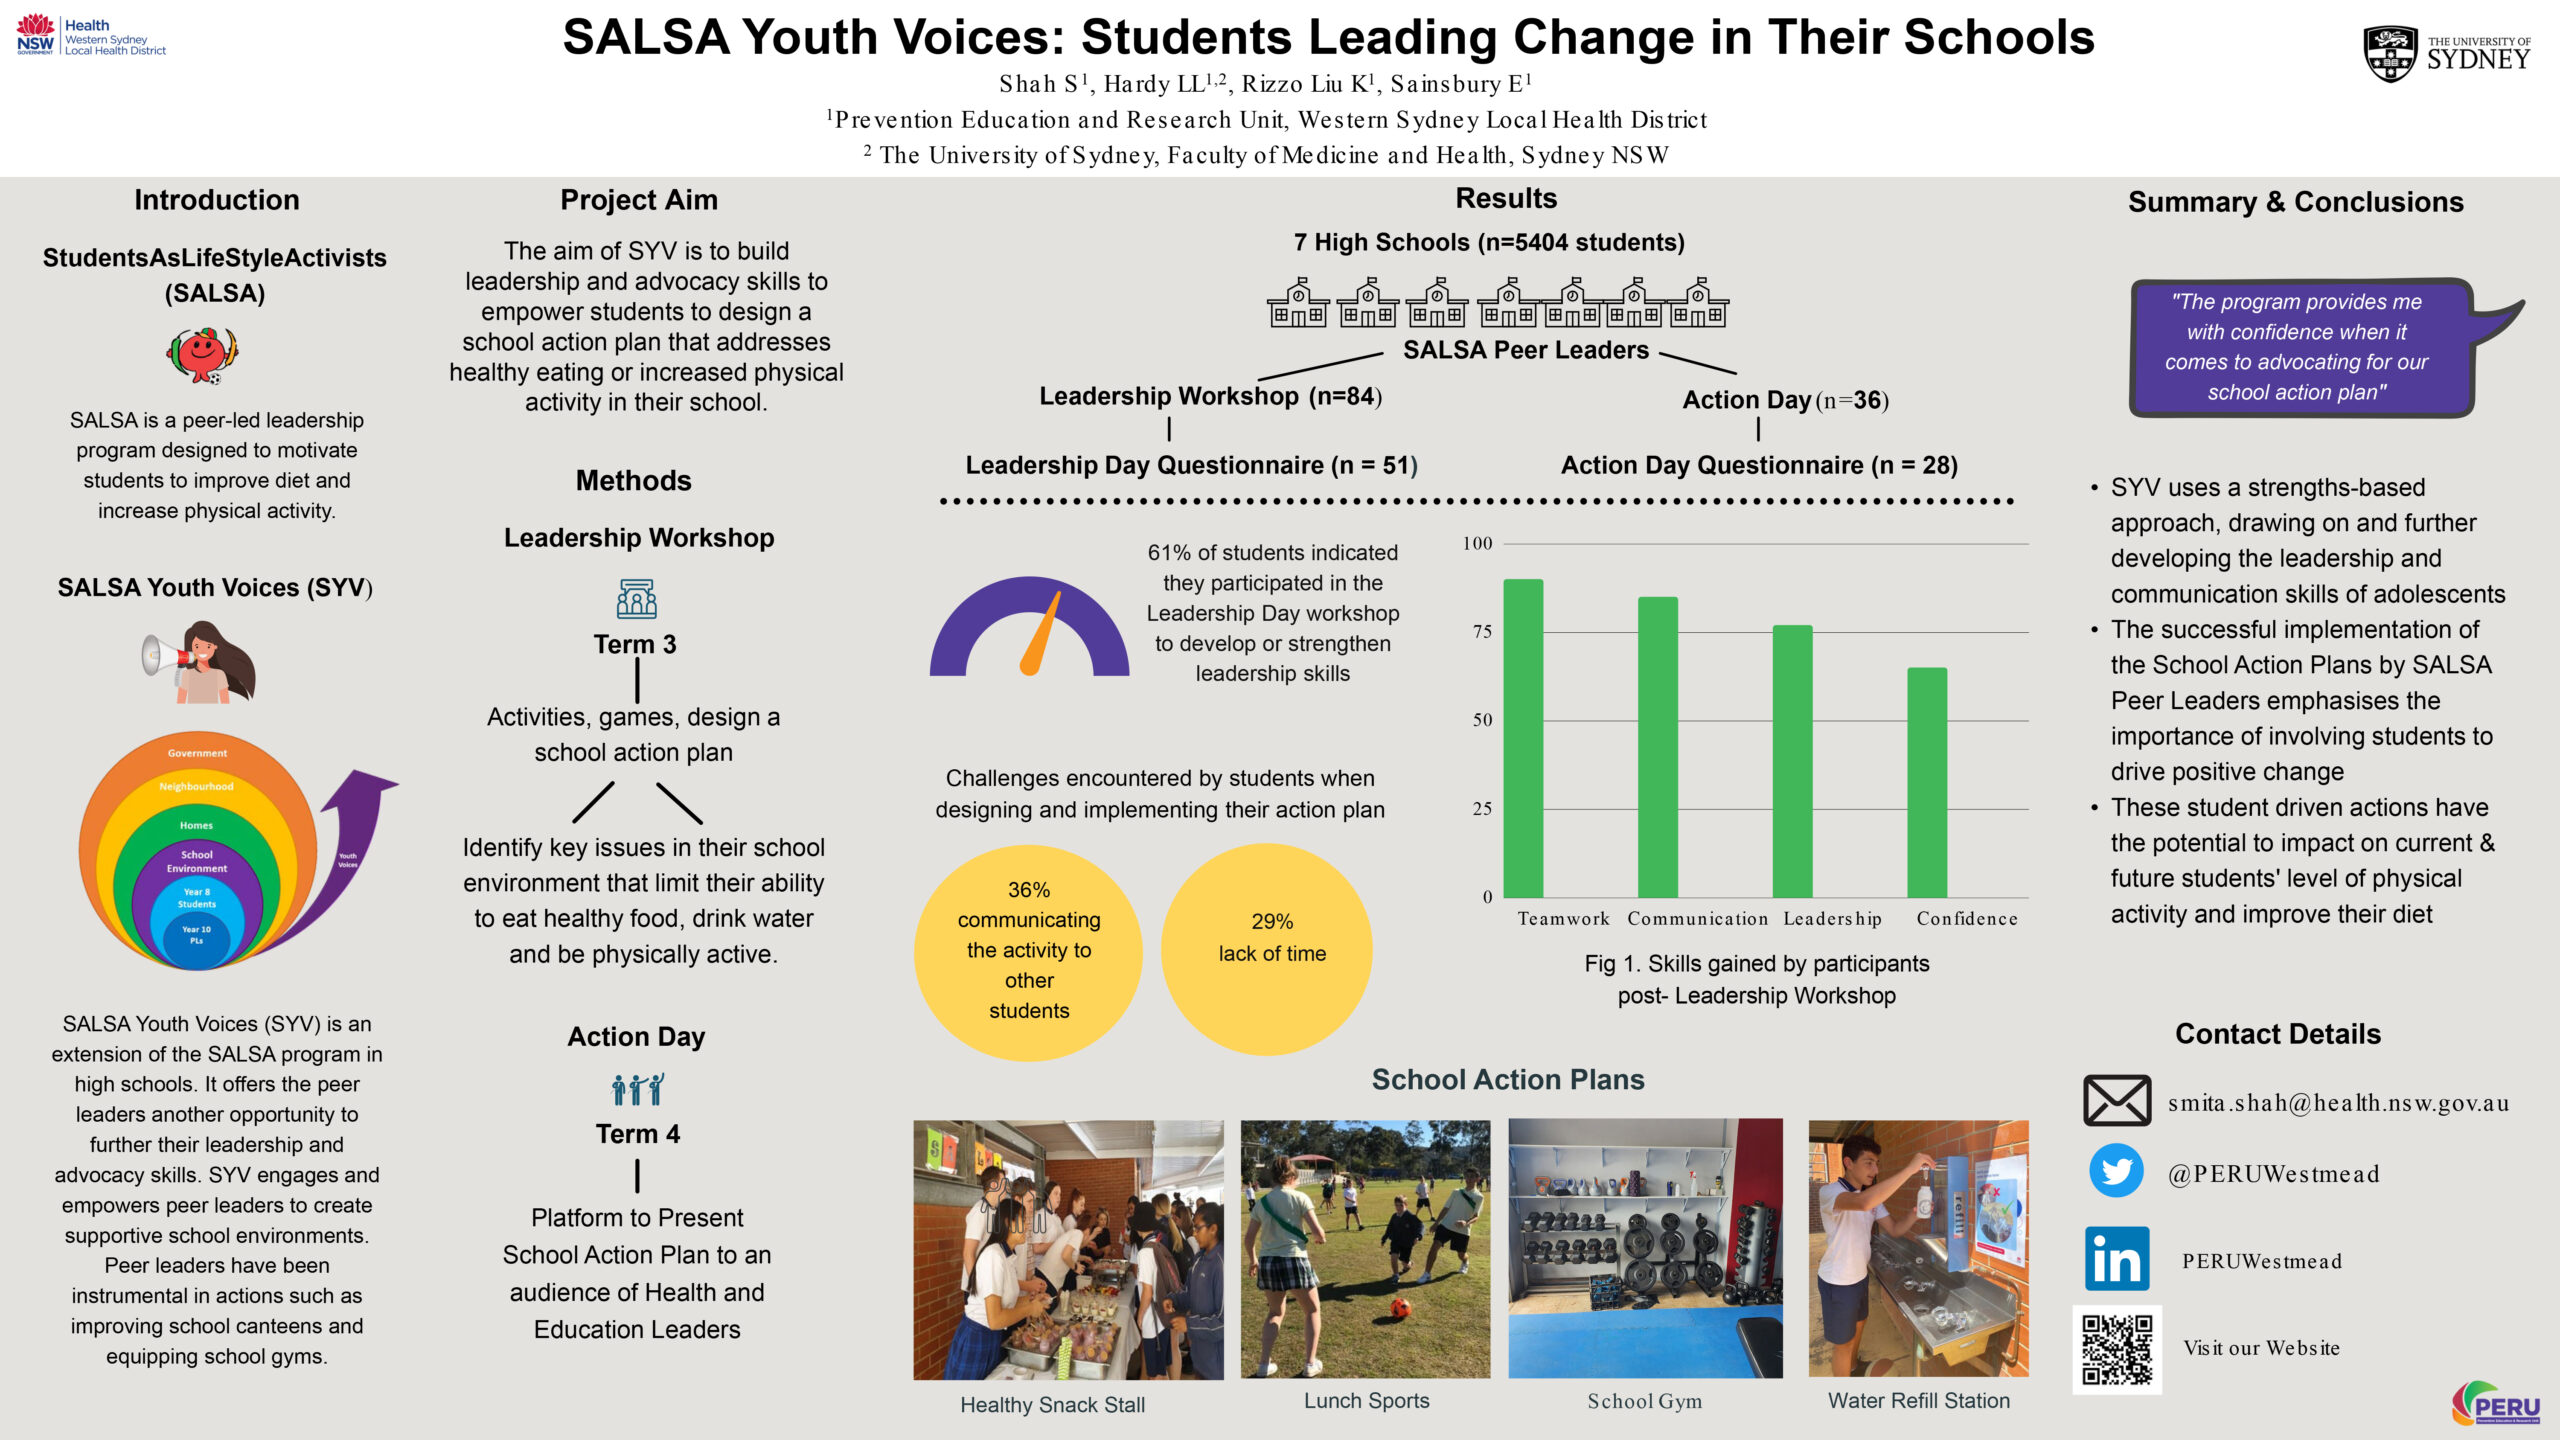 SALSA Youth Voices: Students Leading Change in Their Schools